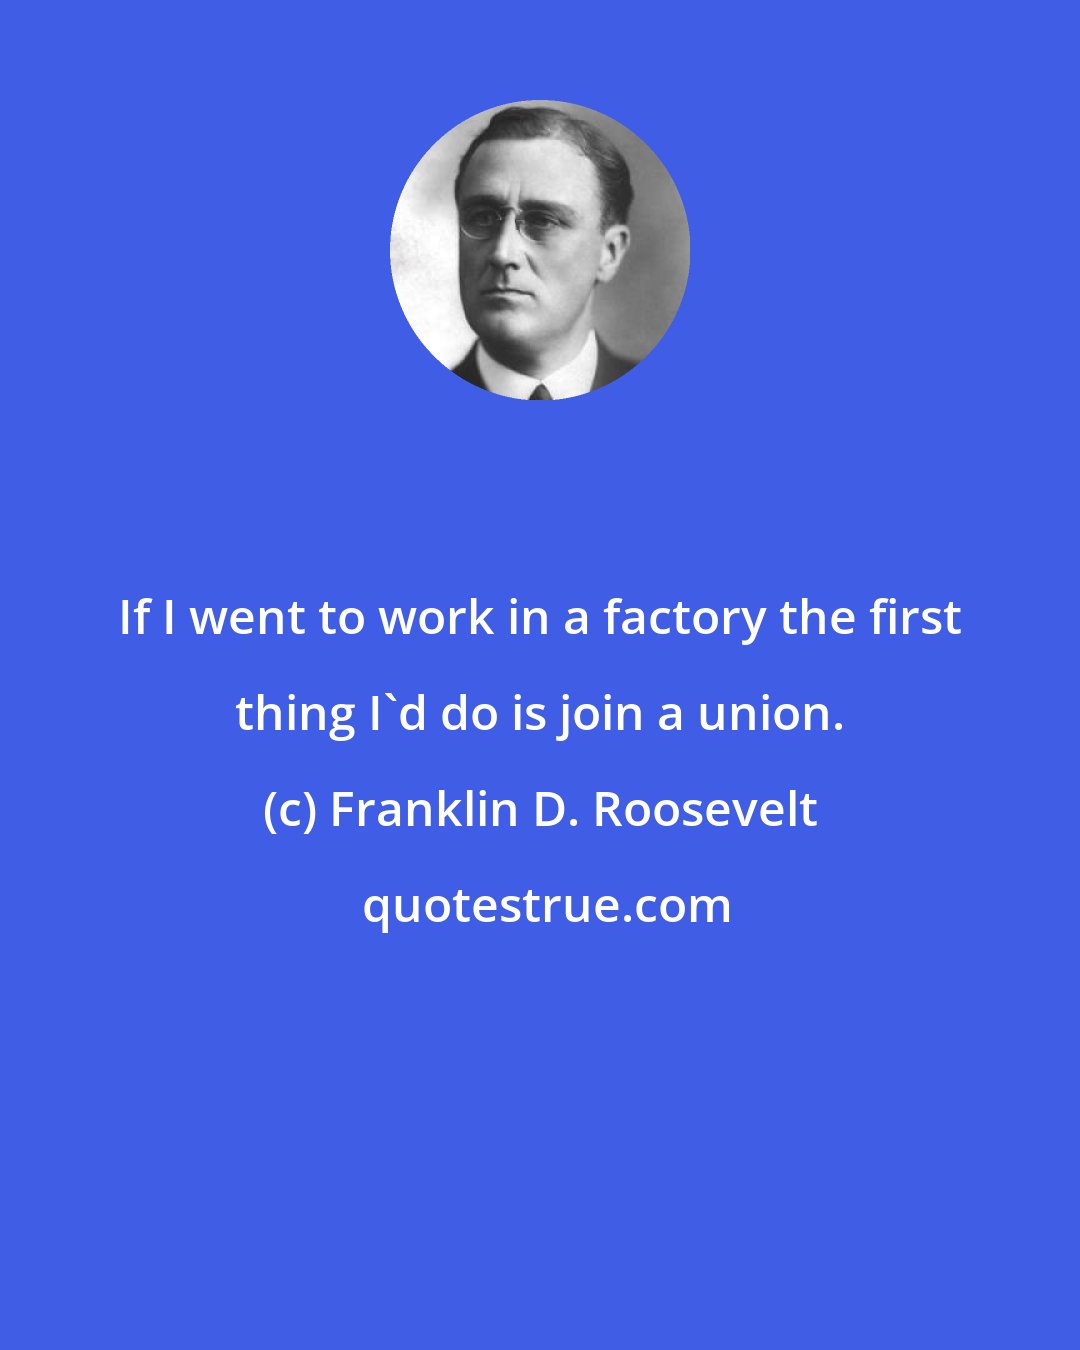 Franklin D. Roosevelt: If I went to work in a factory the first thing I'd do is join a union.